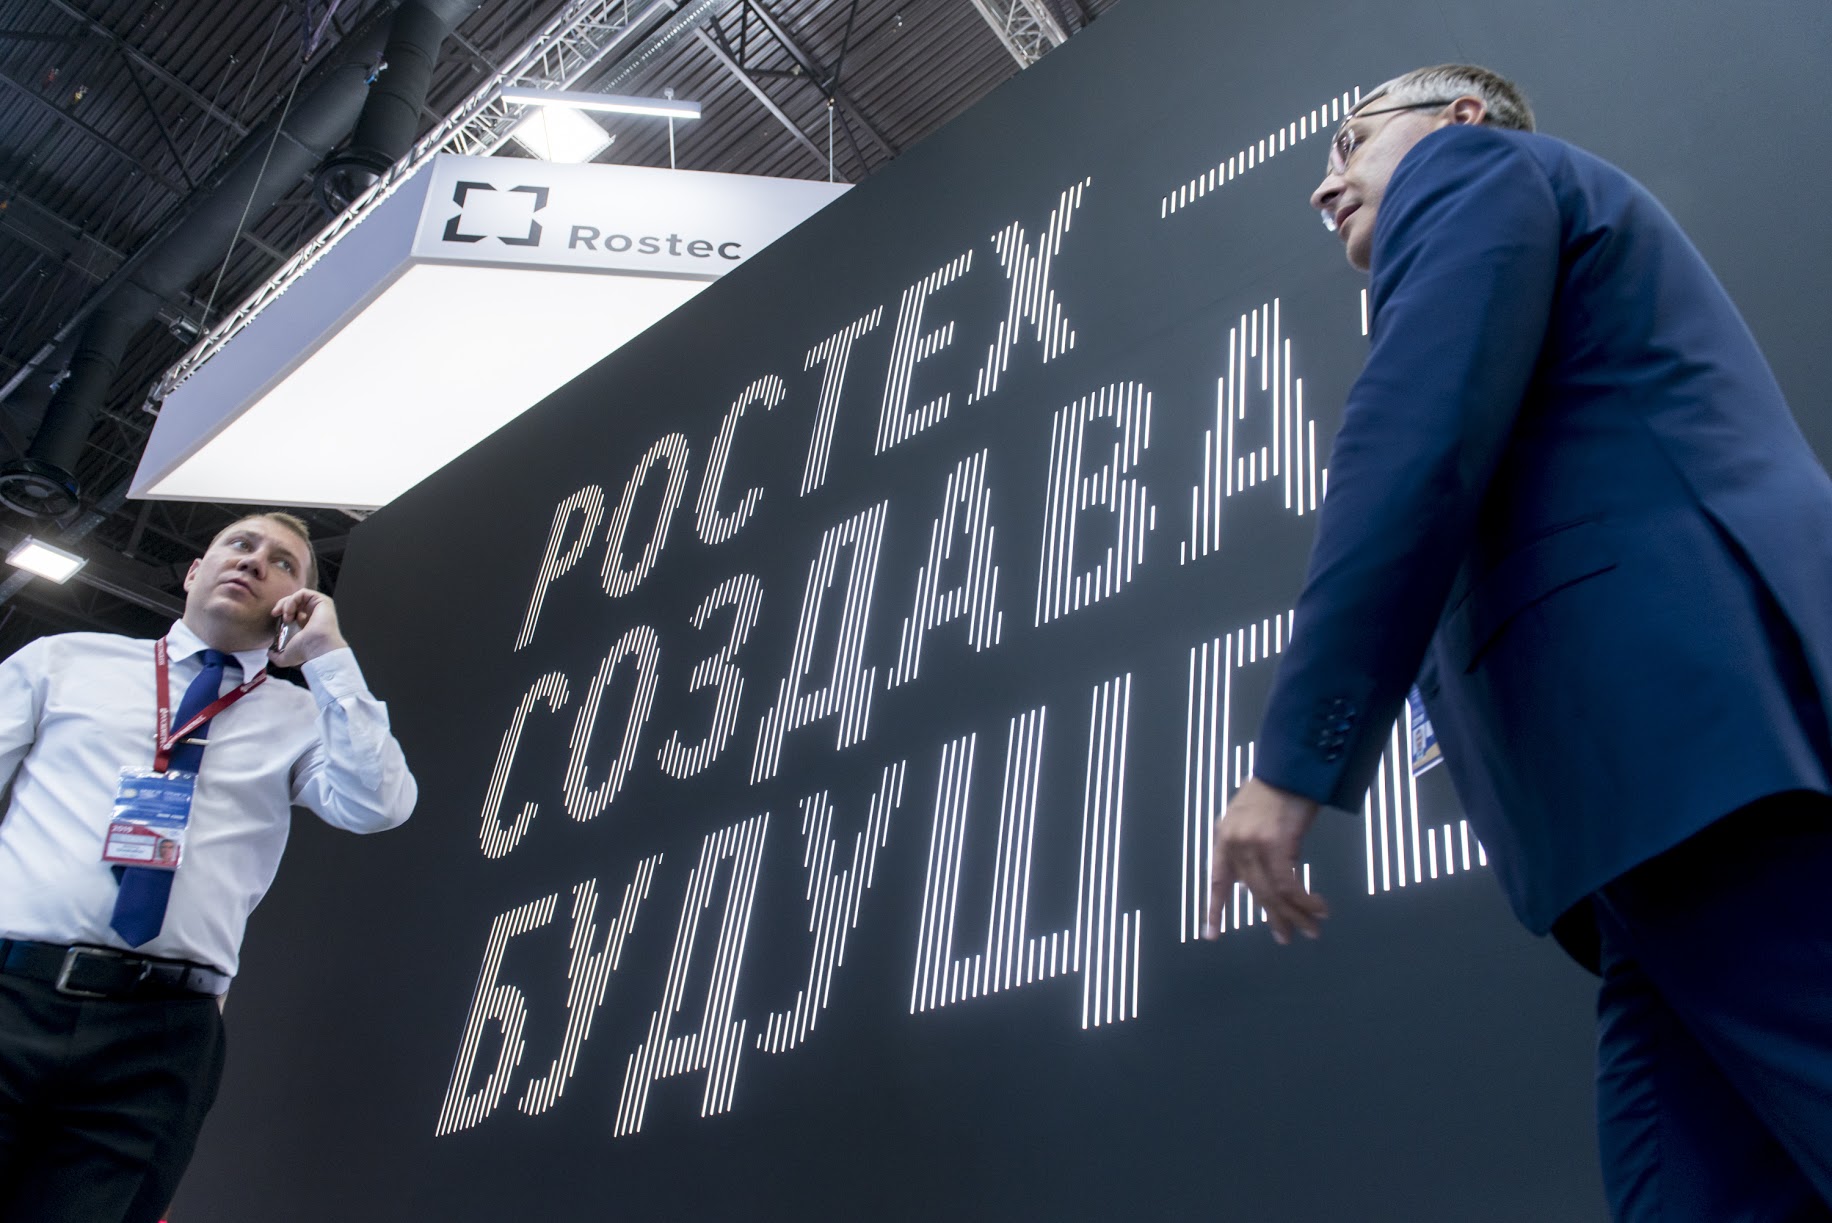 Civilian Order Portfolio for Rostec's Digital Technology Exceeded 78 Billion Rubles in the First Half of the Year